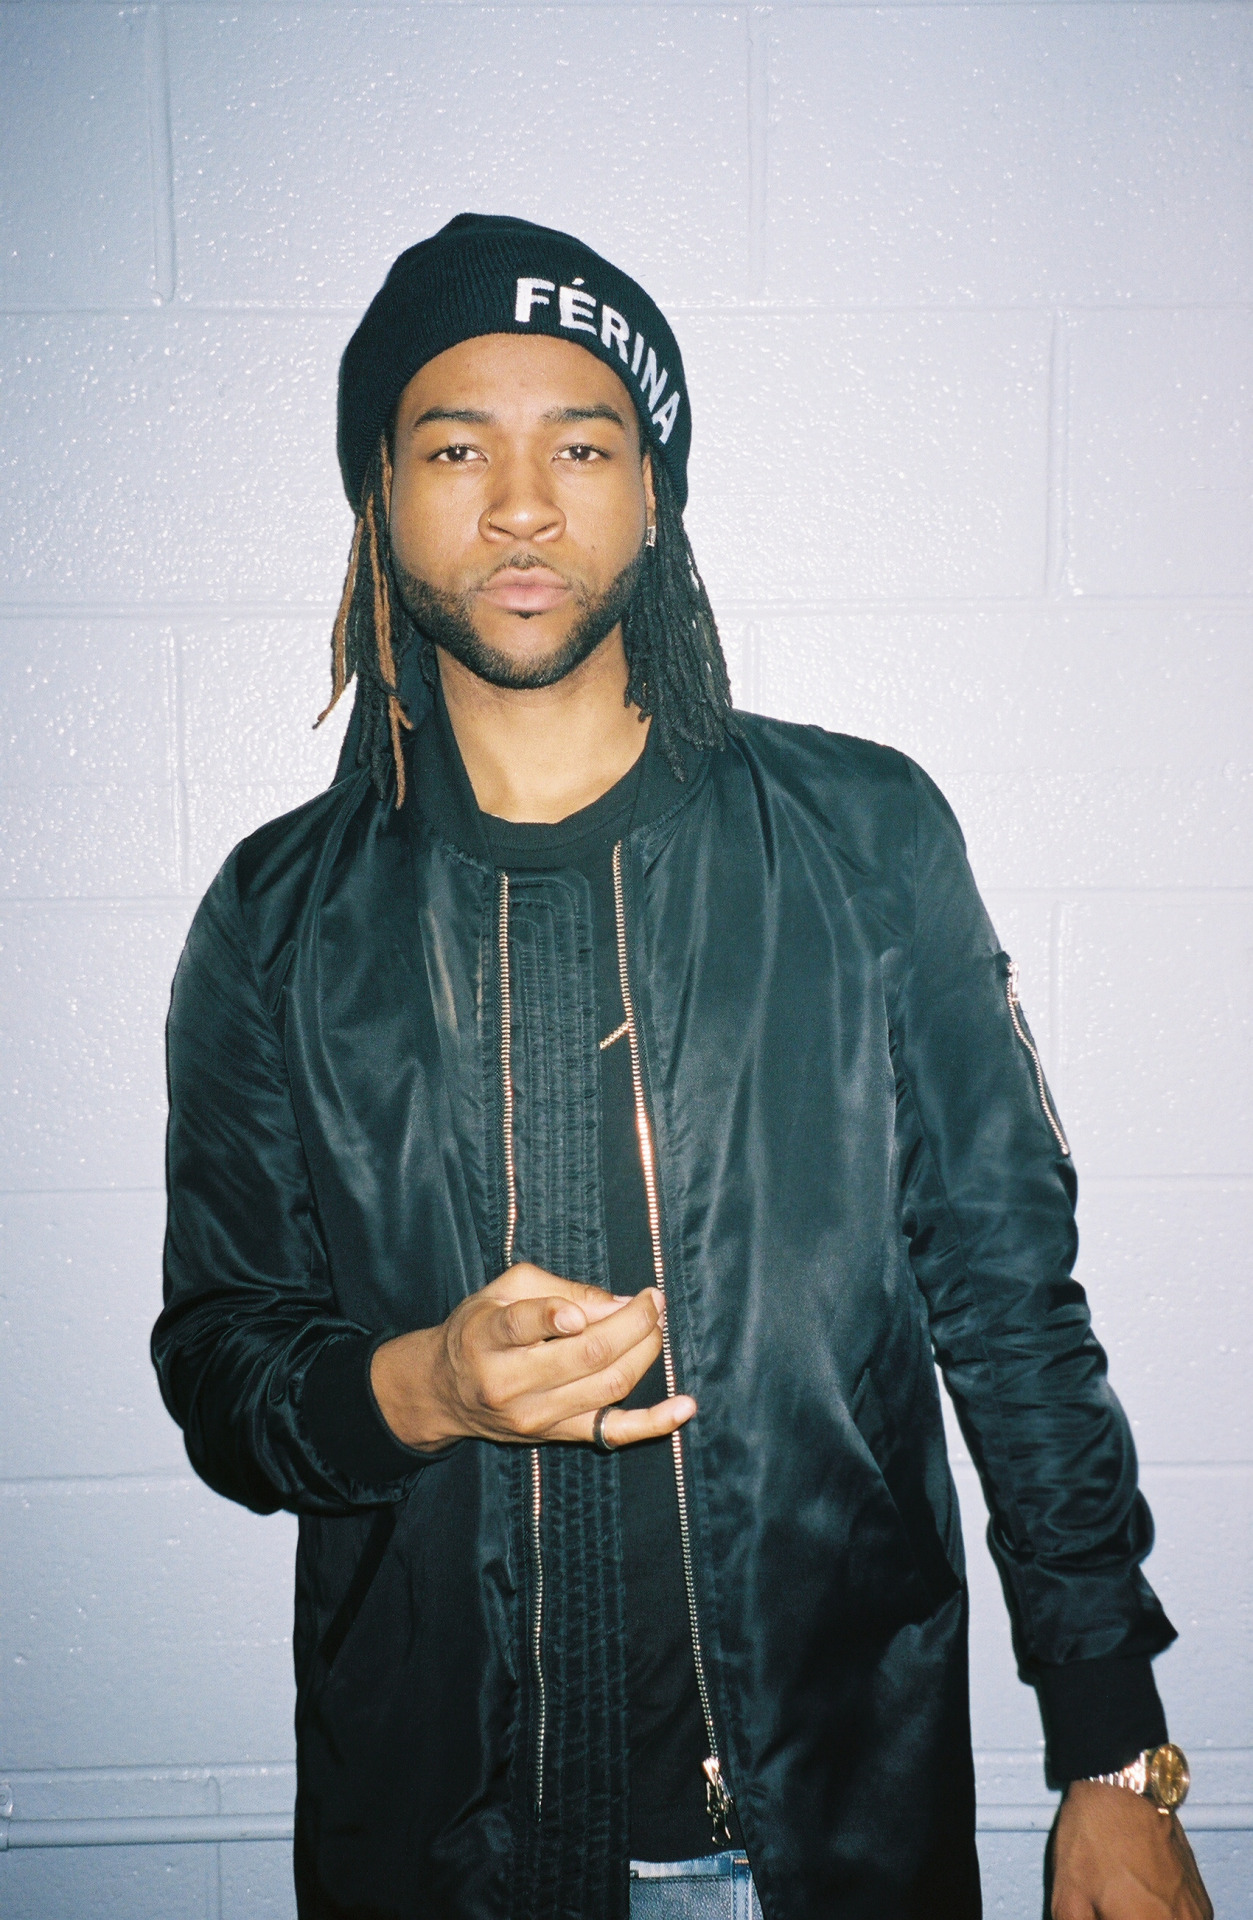 PARTYNEXTDOOR – That’s What I Like (Remix) | Daily Chiefers